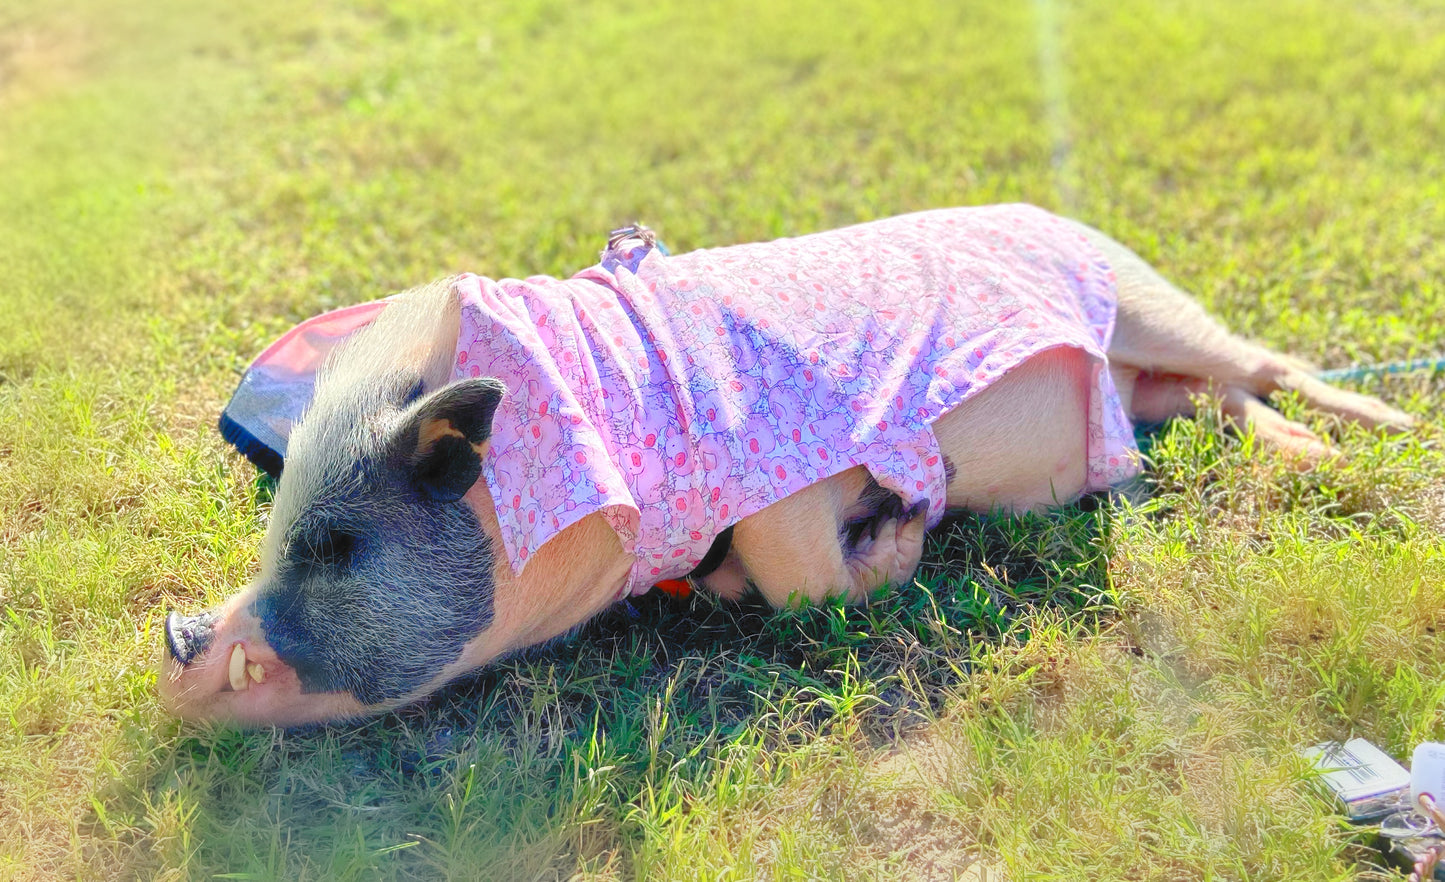 Piggy Print Pig Shirt or Dress for Spring, Summer and Fall! Muddy Pigs Mini Pig Clothes, Clothing for Potbelly Pigs, Hogs, & Boars